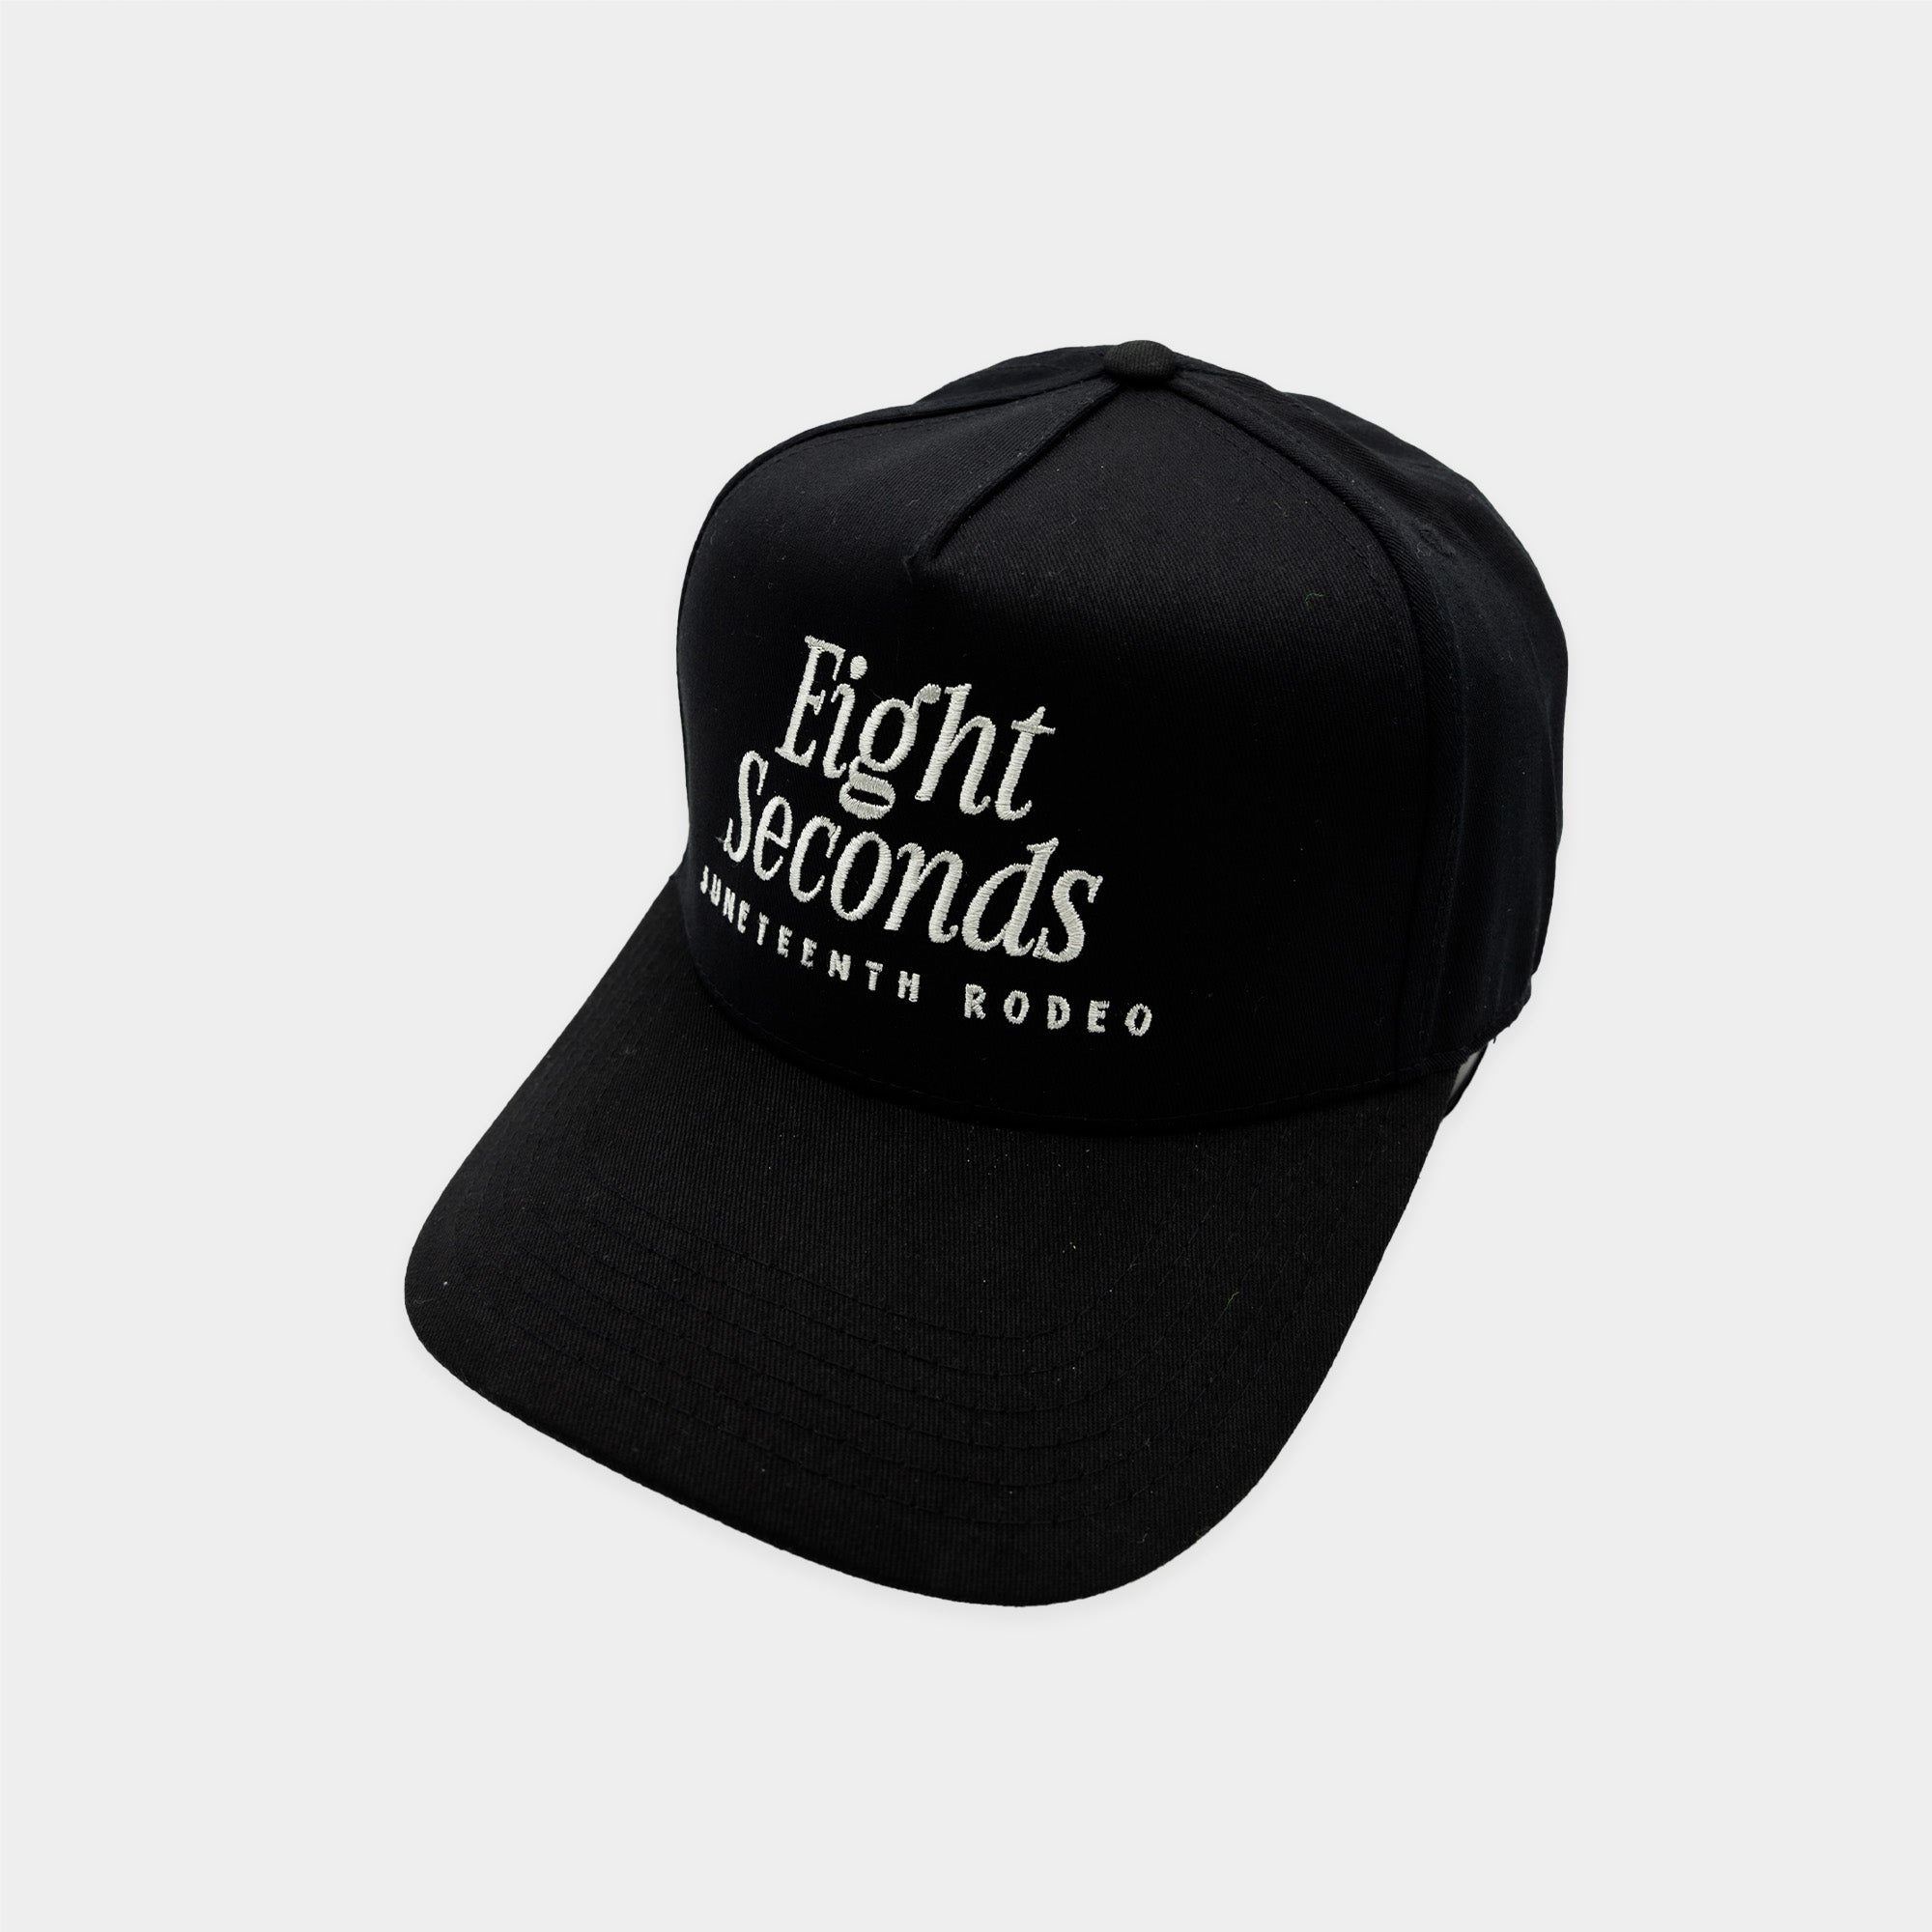 Eight Seconds Rodeo Hat